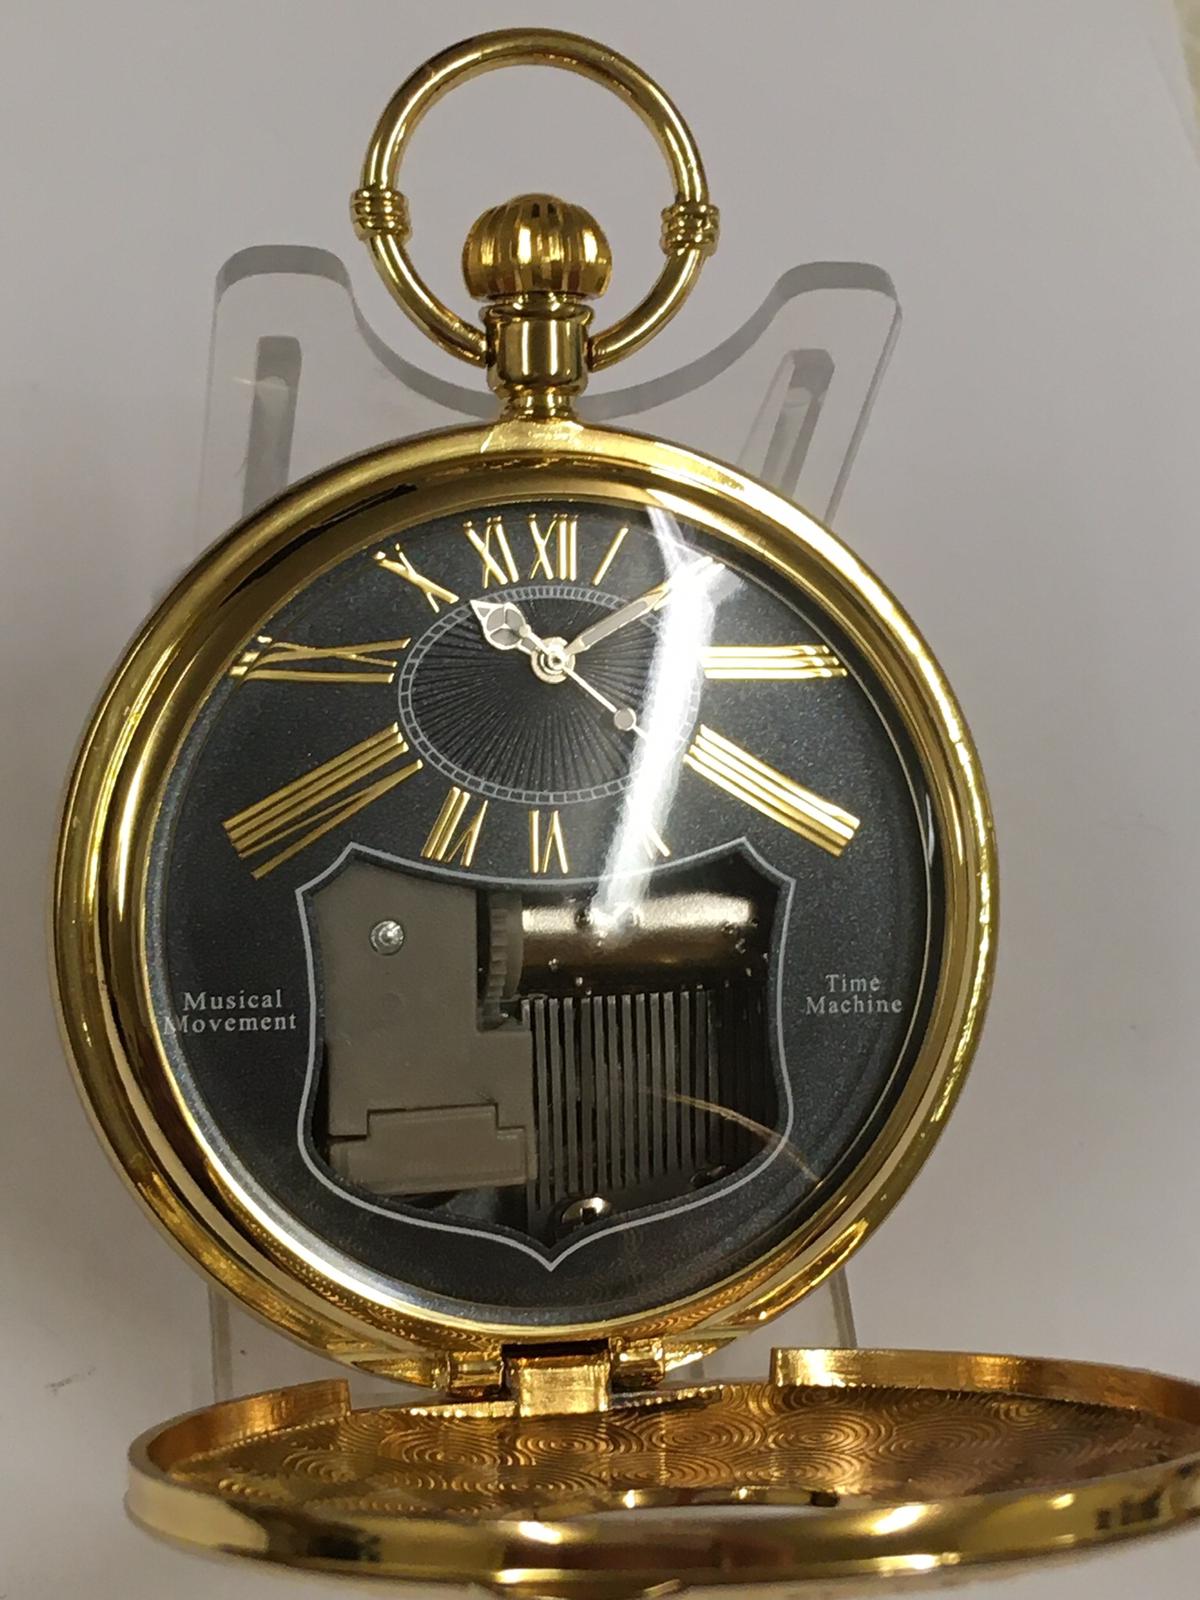 Musical full hunter pocket watch , working and mechanical music playing is functional